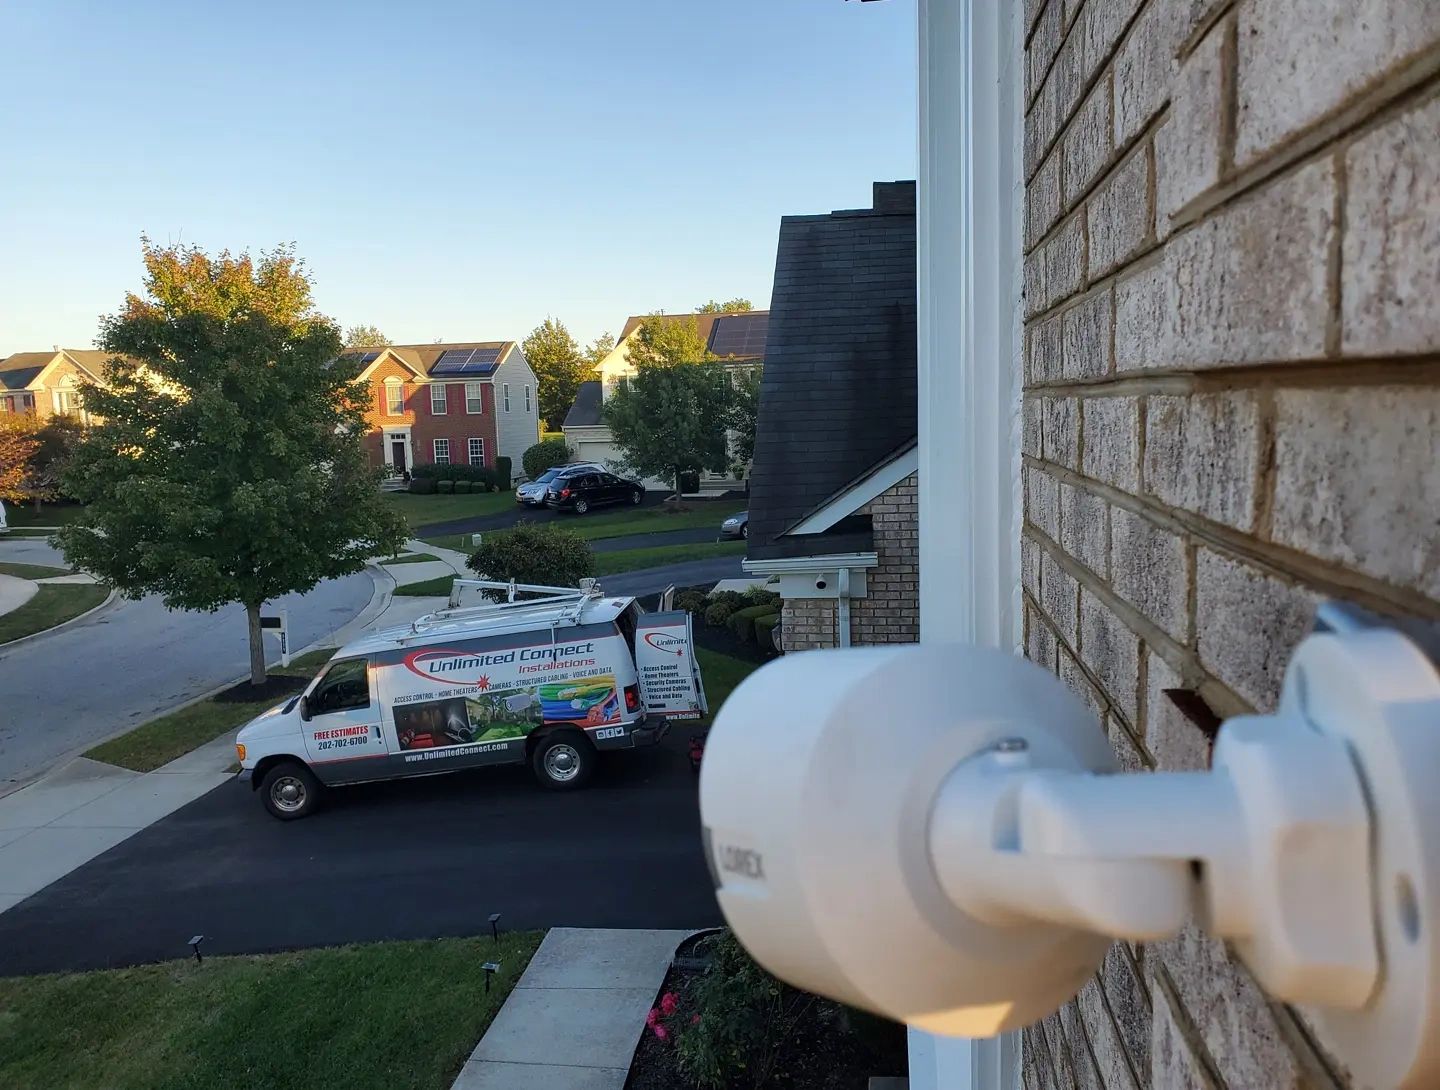 prince-george-s-co-security-camera-rebate-program-for-homeowners